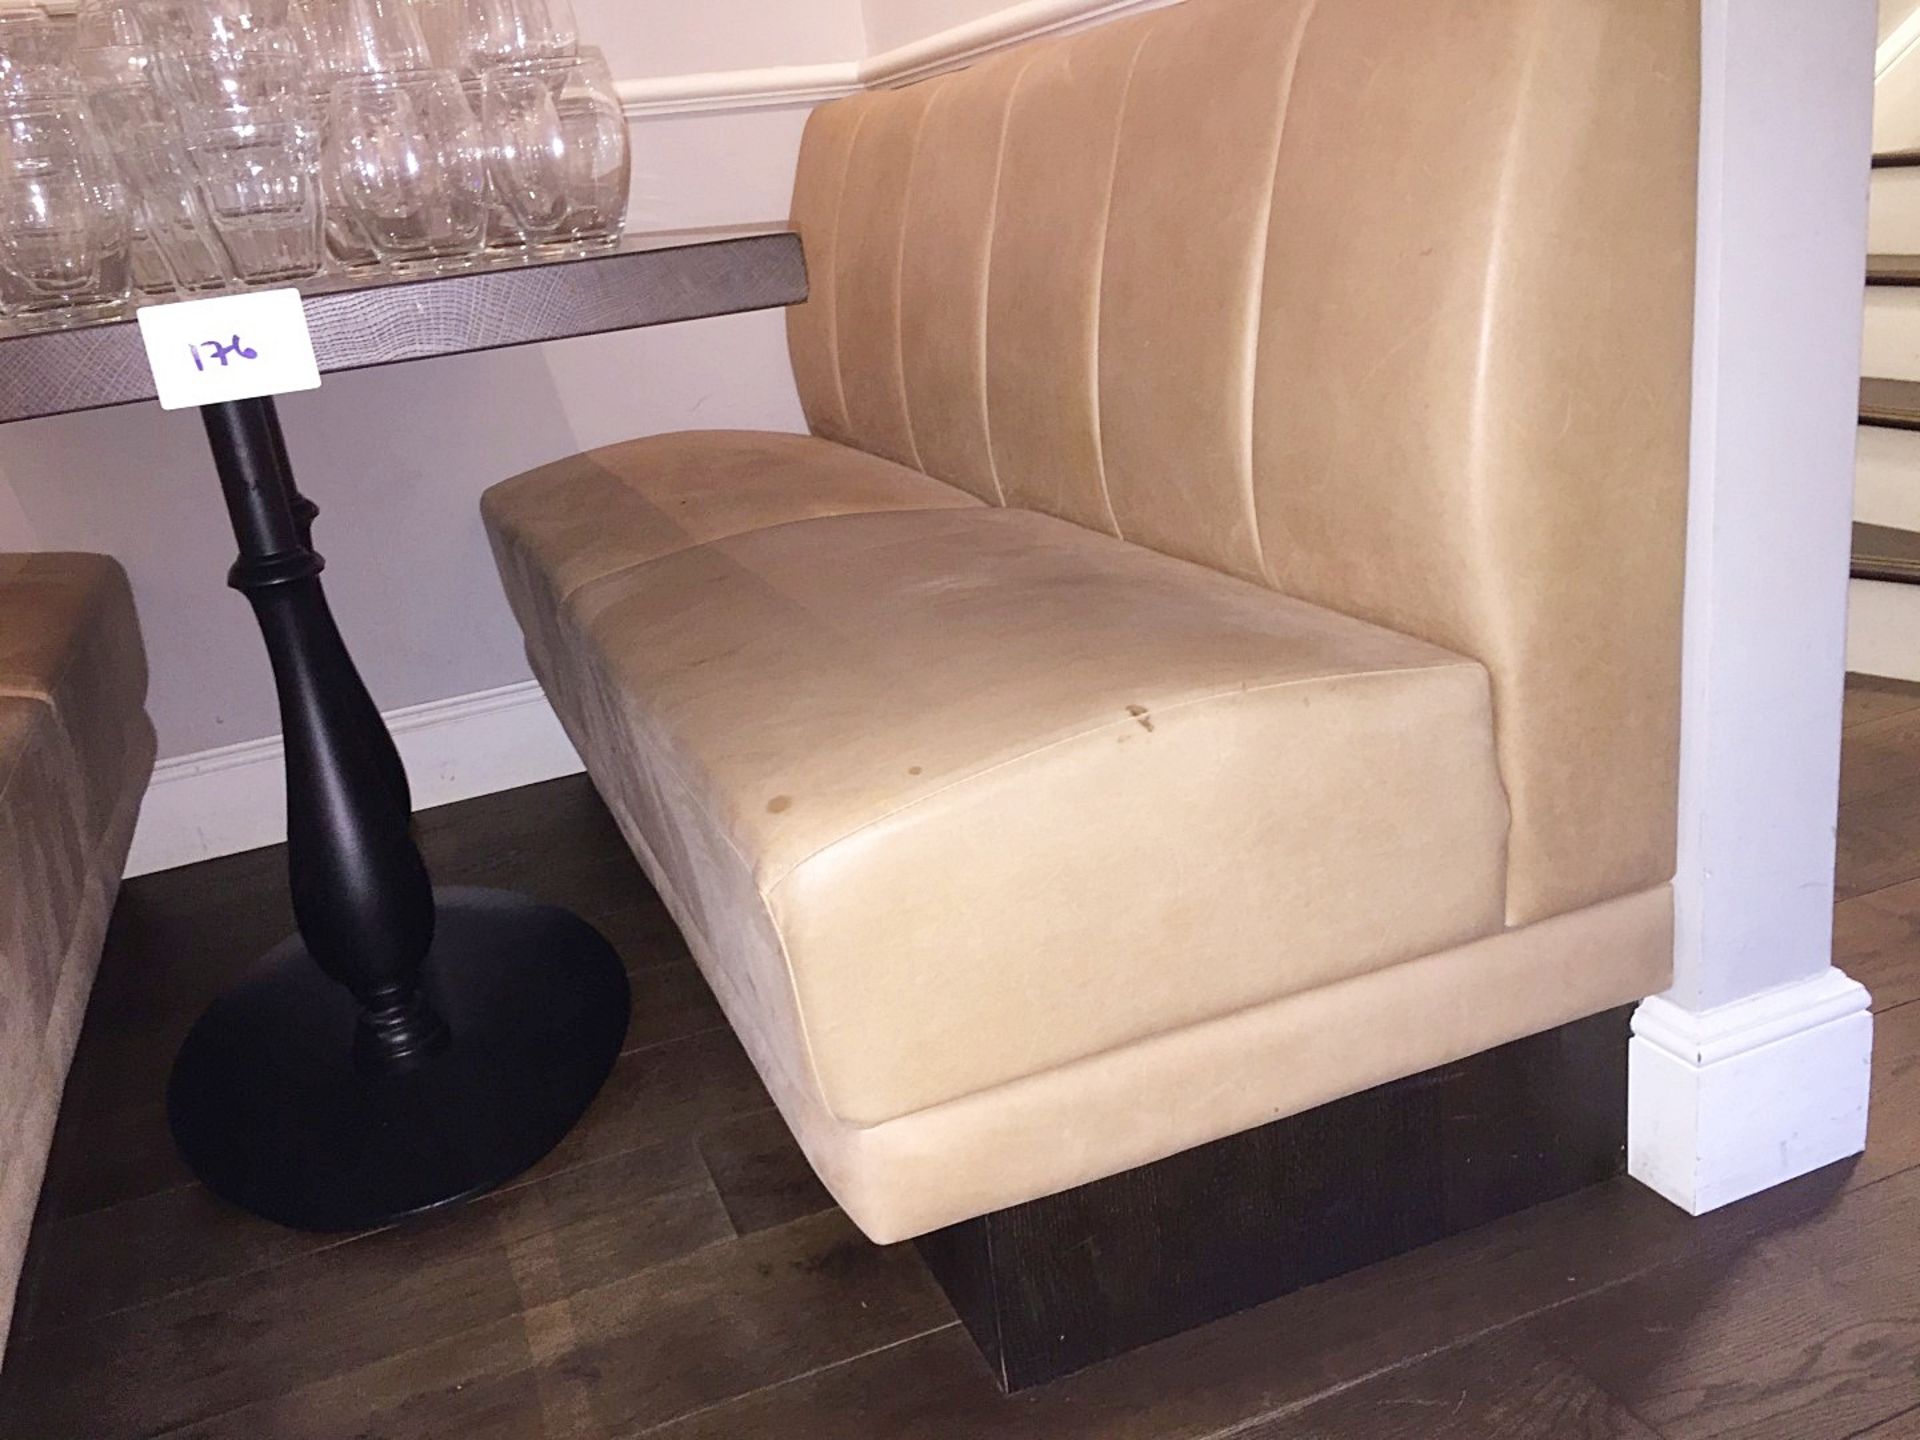 1 x Luxurious High End Seating Booth - Tastefully Upholstered In Cream Leather with Comfortable - Image 2 of 4